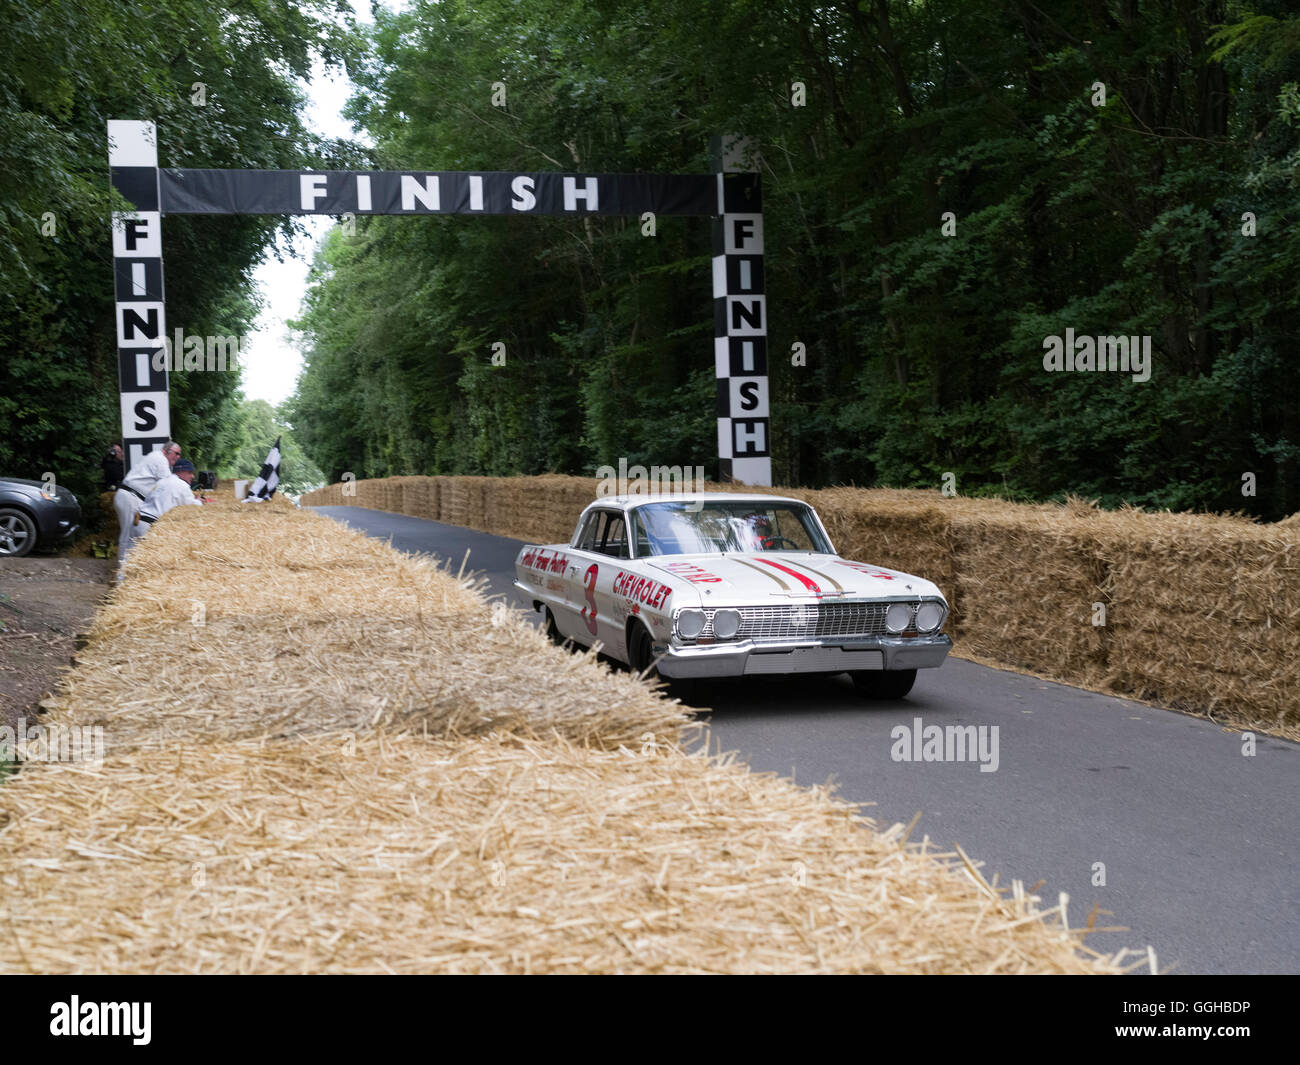 1963 Chefrolet Impala at the finishing line, Goodwood Festival of Speed 2014, racing, car racing, classic car, Chichester, Susse Stock Photo